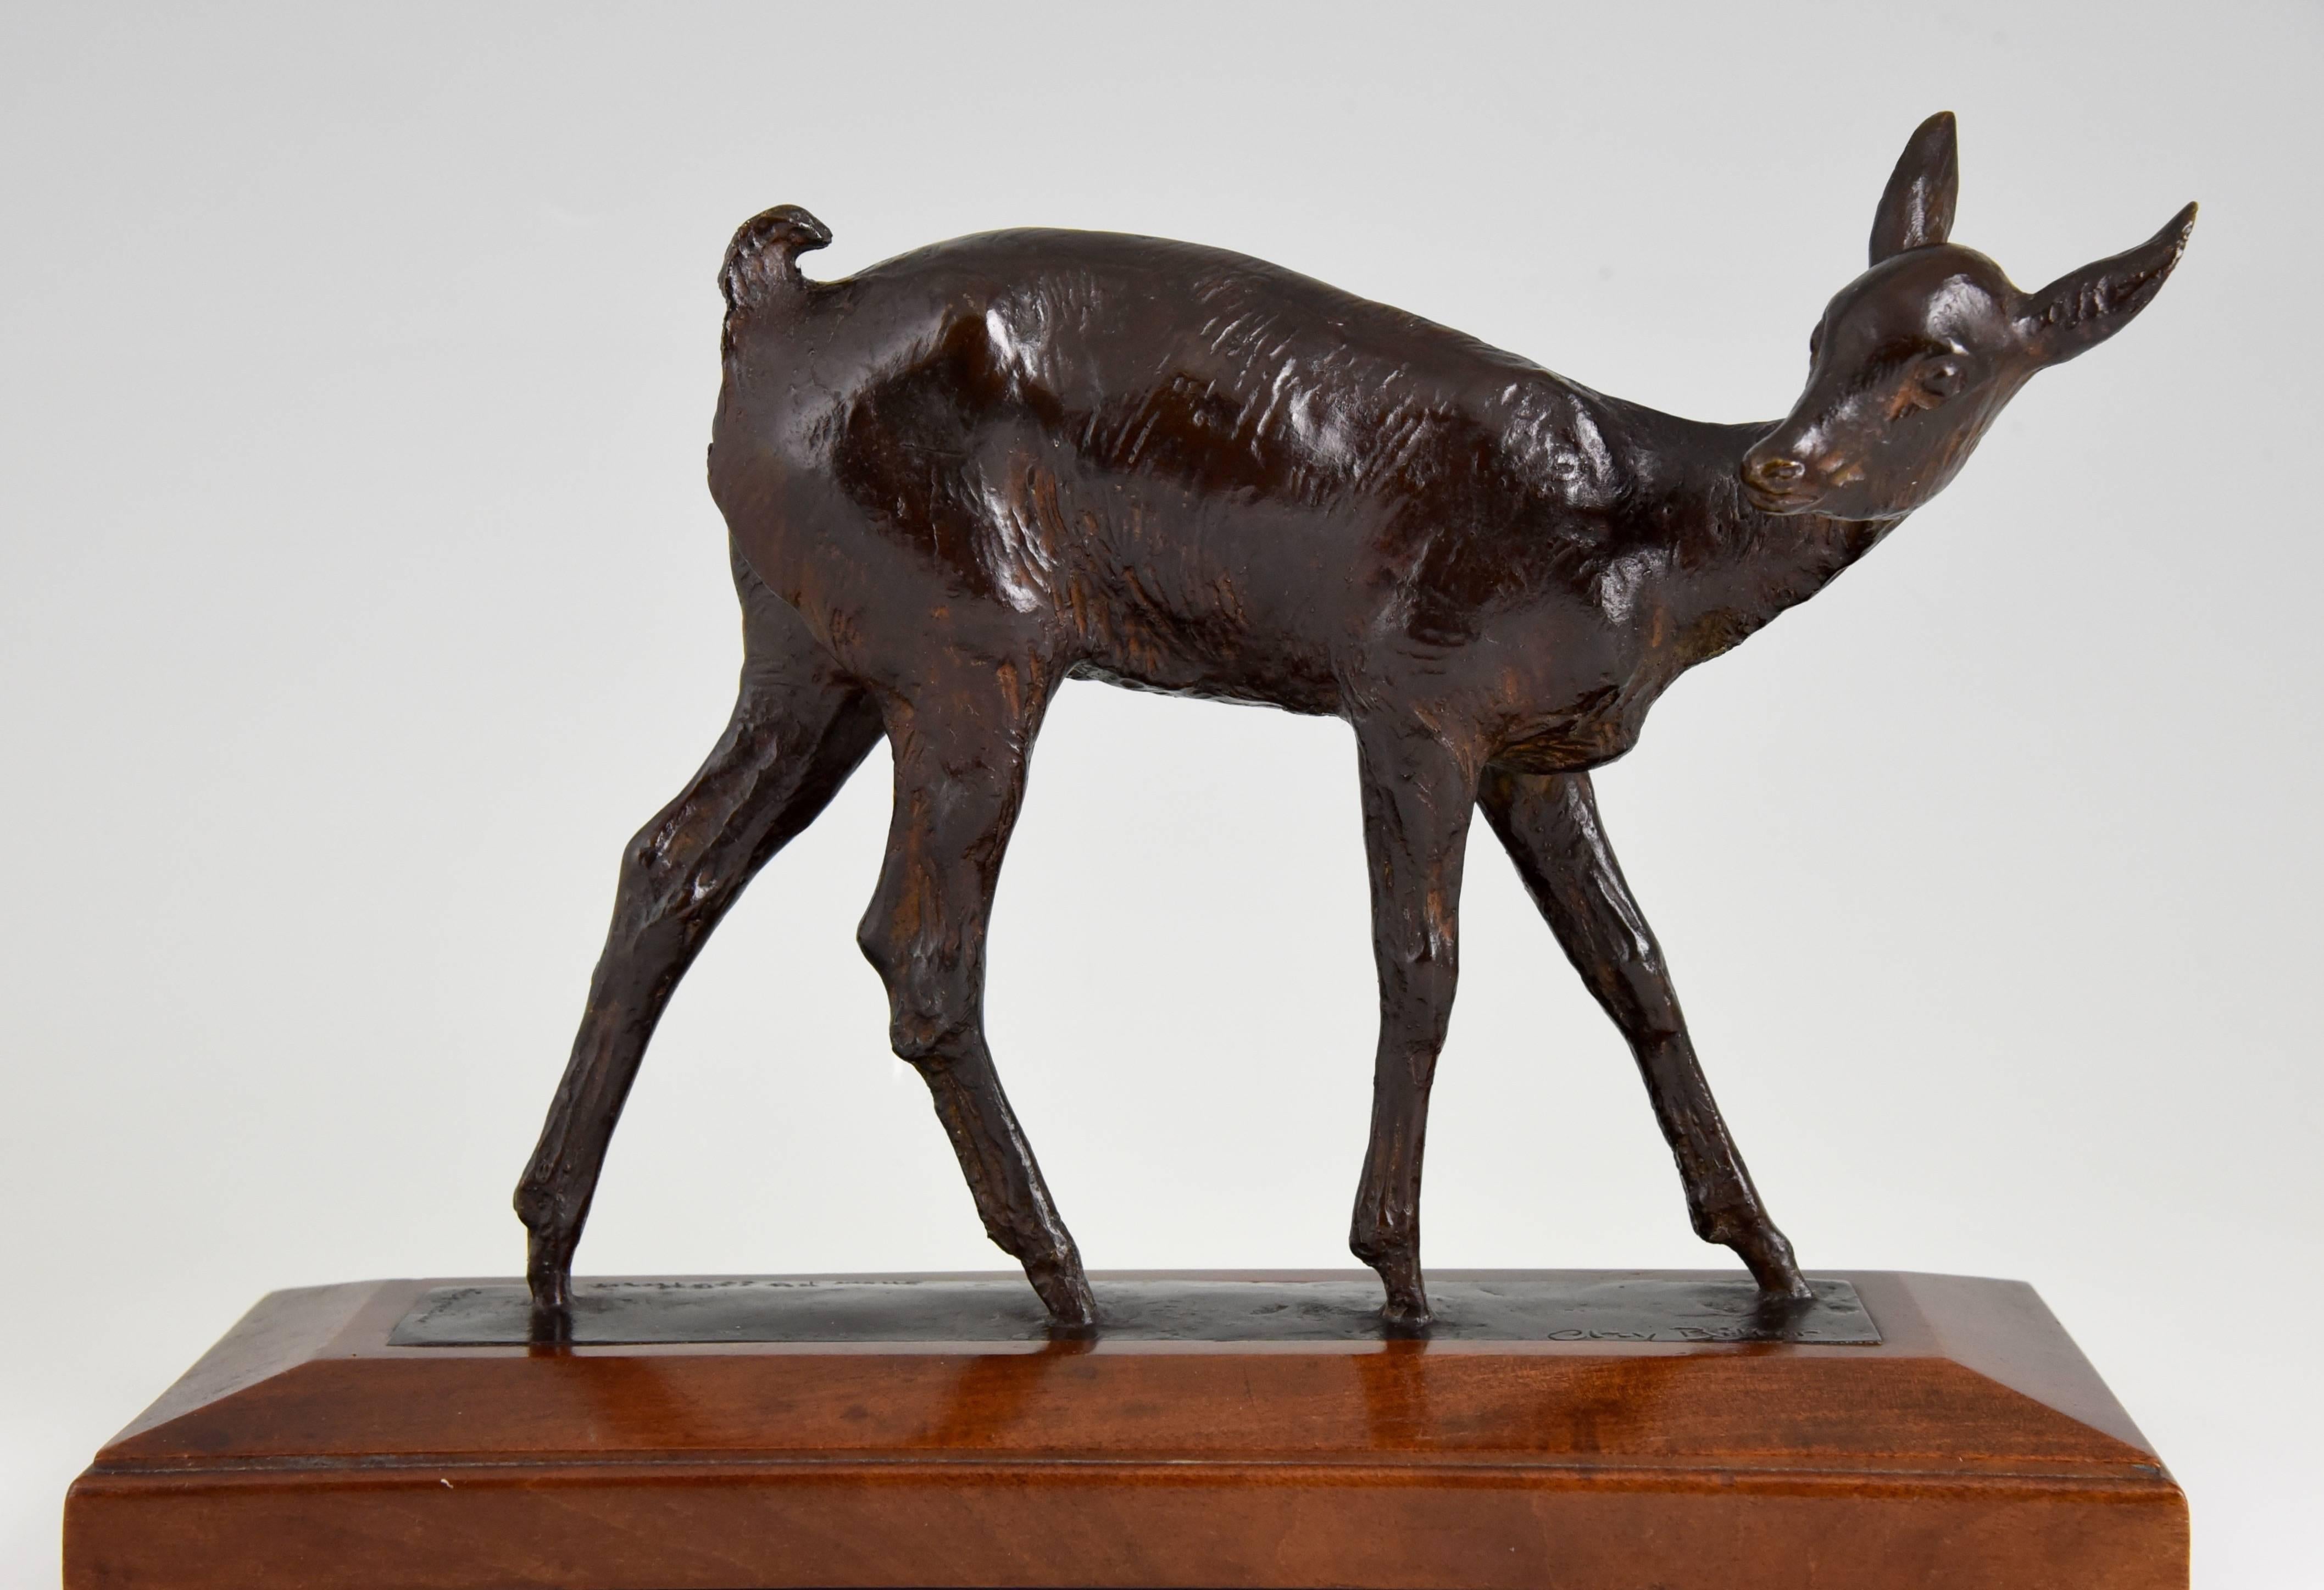 French Art Deco bronze sculpture of a deer fawn by Ary Bitter, 1930.

Artist/ Maker: Ary Bitter.
Signature/ Marks: Ary Bitter , Susse Freres Ed. Paris.  Cire Perdue.
Style: Art Deco.
Date: 1925-1930.
Material: Bronze, wooden base.
Origin: